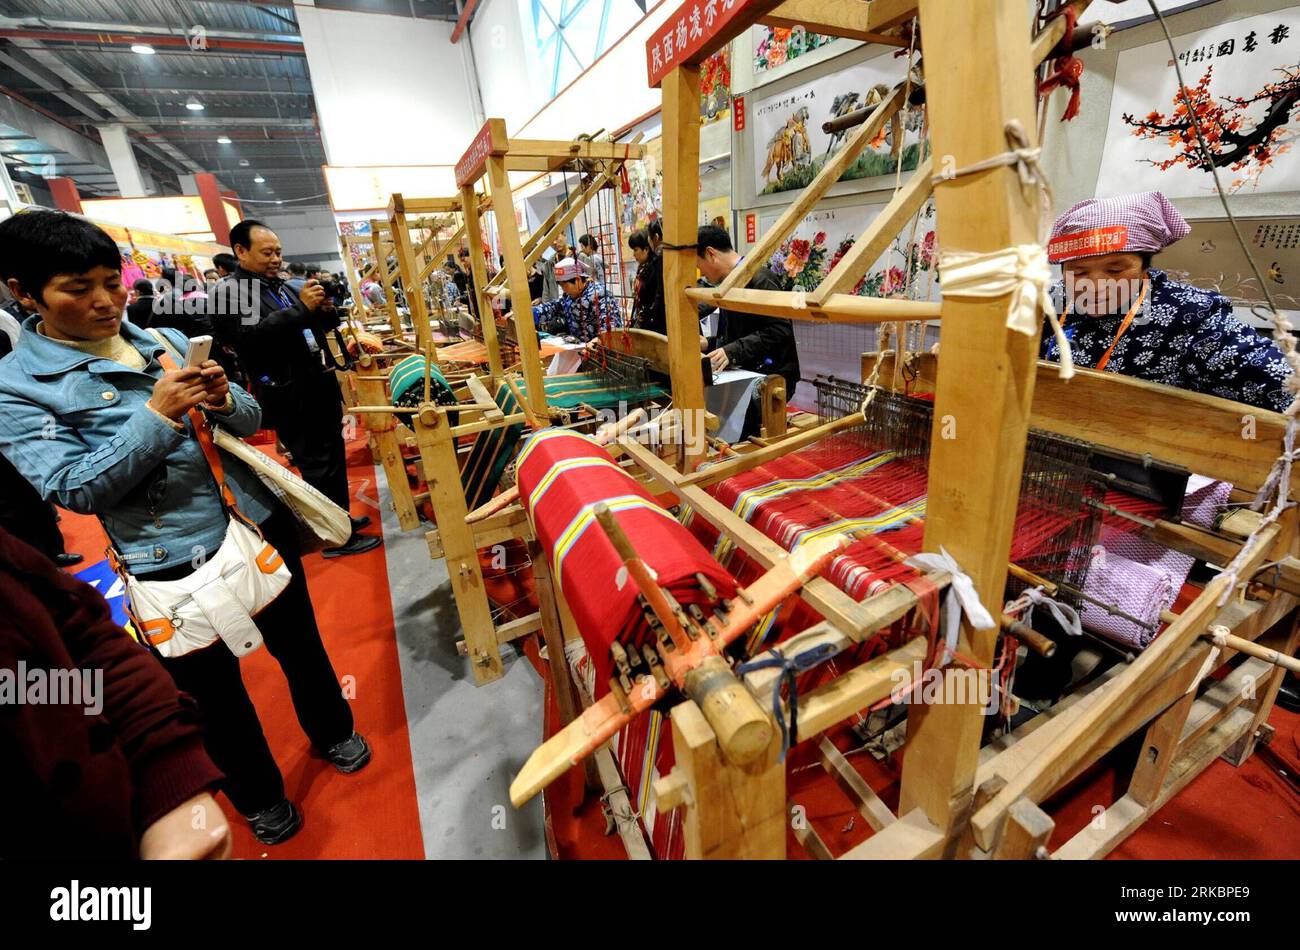 Bildnummer: 54591415  Datum: 02.11.2010  Copyright: imago/Xinhua (101102) -- YANGLING, Nov. 2, 2010 (Xinhua) -- Craftswomen demonstrate hand weaving at an agricultural exhibition in Yangling, northwest China s Shaanxi Province, Nov. 2, 2010. The traditional hand weaving originated in Shaanxi has a history of thousands years, and the industry is reviving in Shaanxi as the textiles win popularity among buyers for bright colors and the organic quality. (Xinhua/Liu Xiao) (zhs) CHINA-SHAANXI-HANDWEAVING (CN) PUBLICATIONxNOTxINxCHN Gesellschaft Arbeitswelten Frauen Weben Weberei Handwerk Webstuhl kb Stock Photo